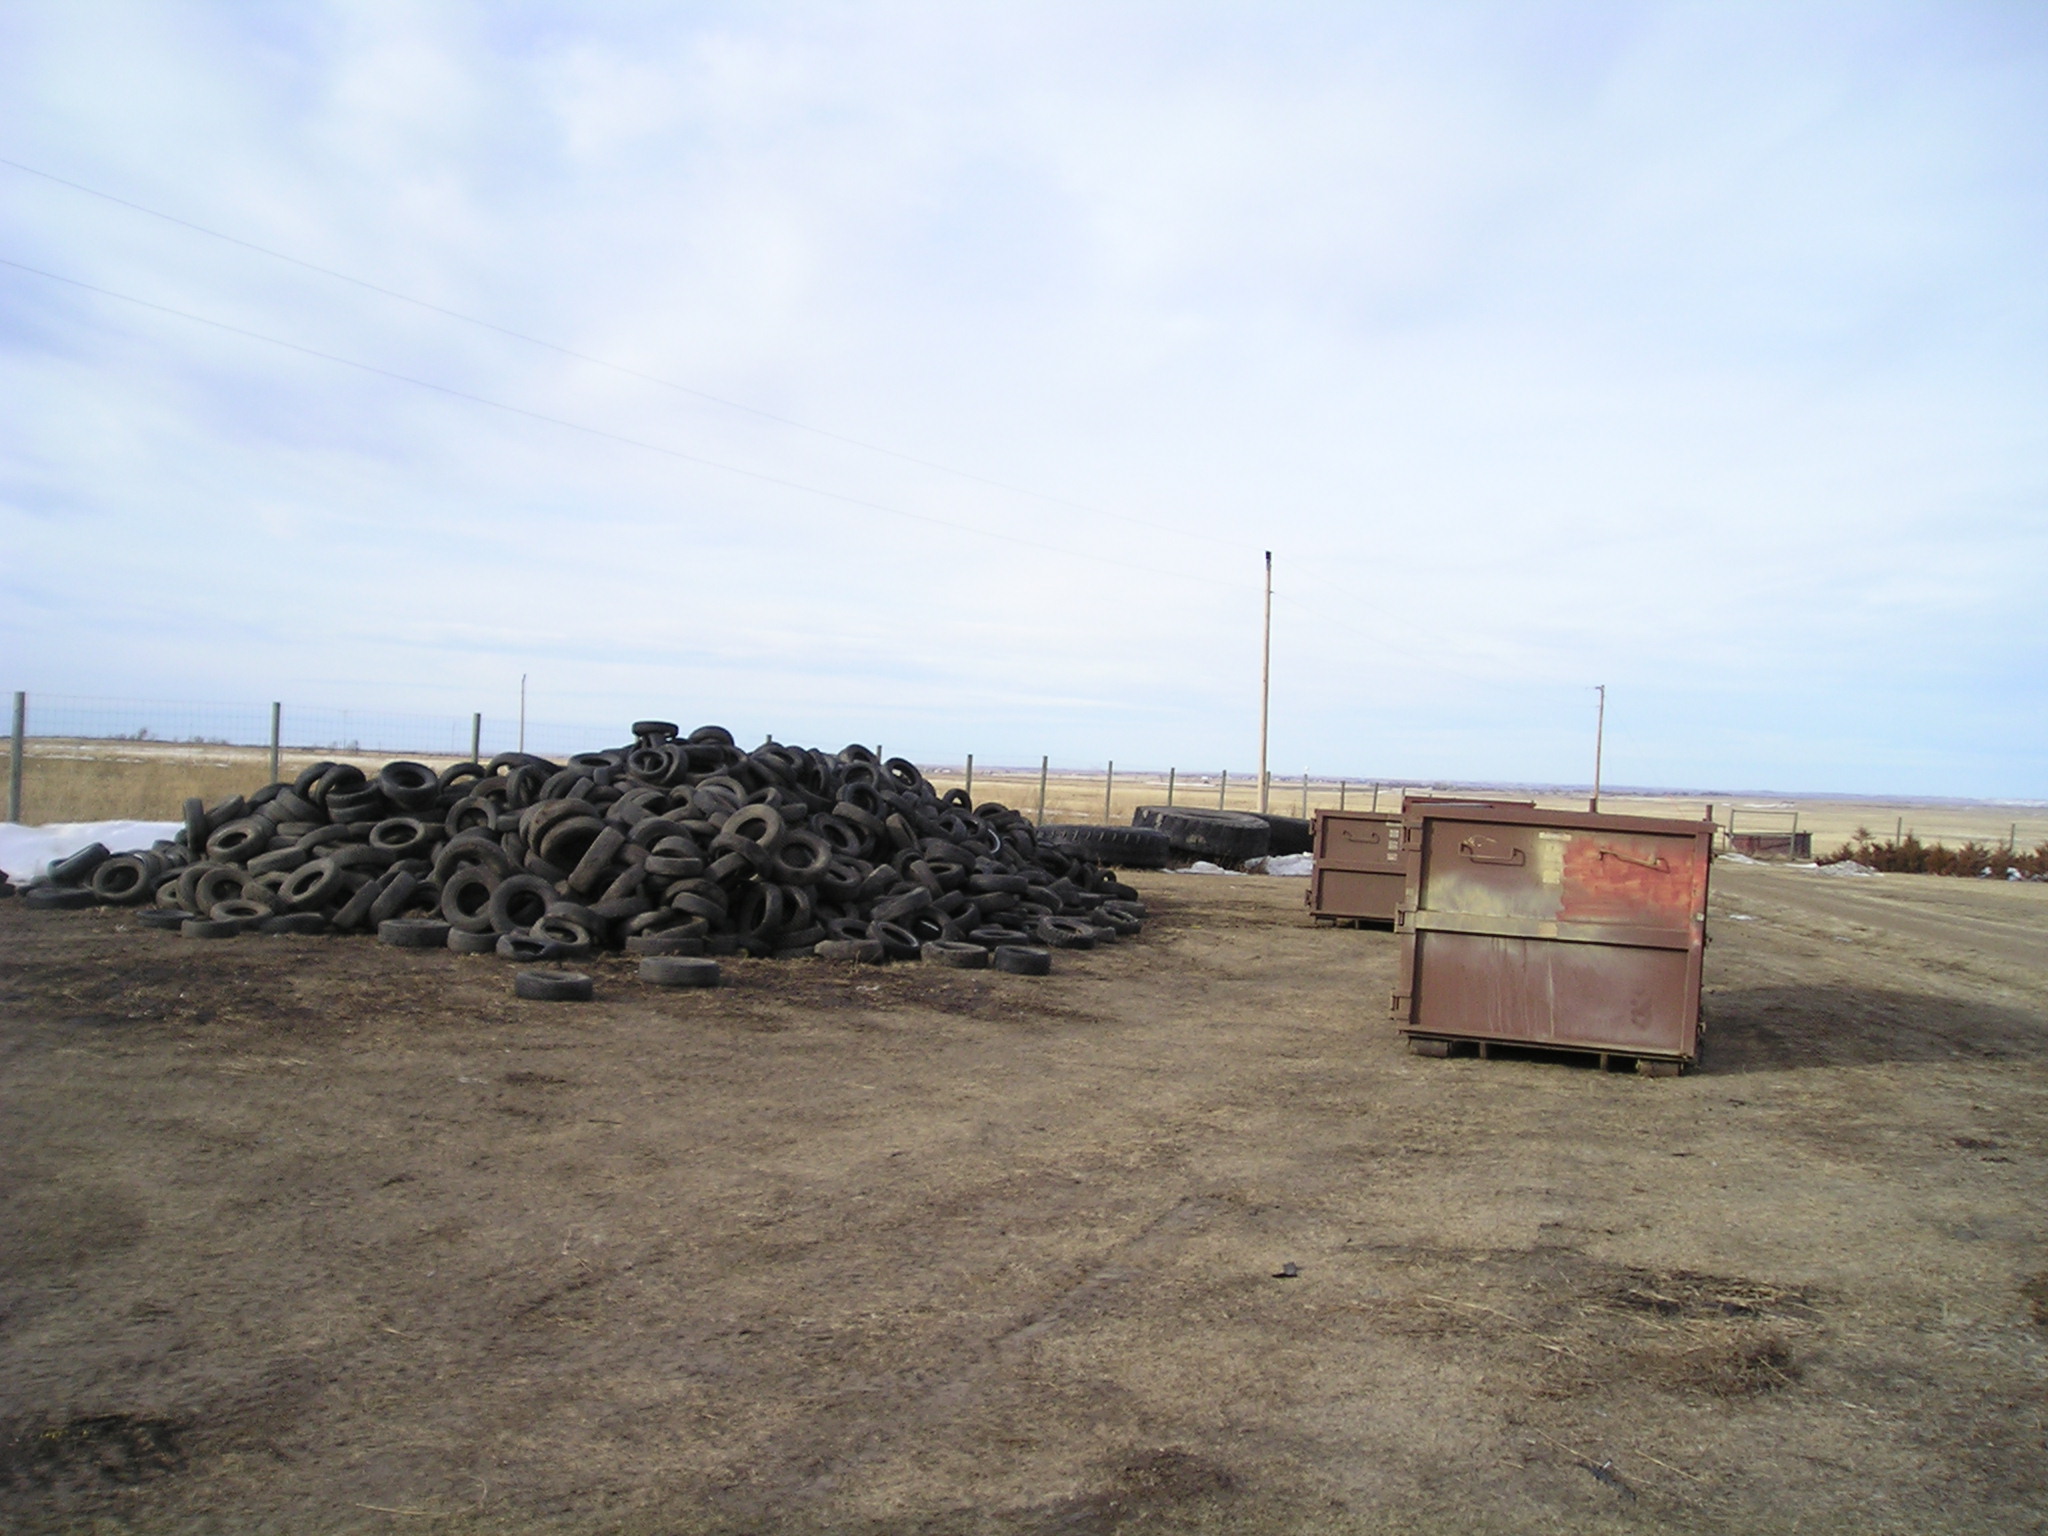 Waste tire pile before clean up